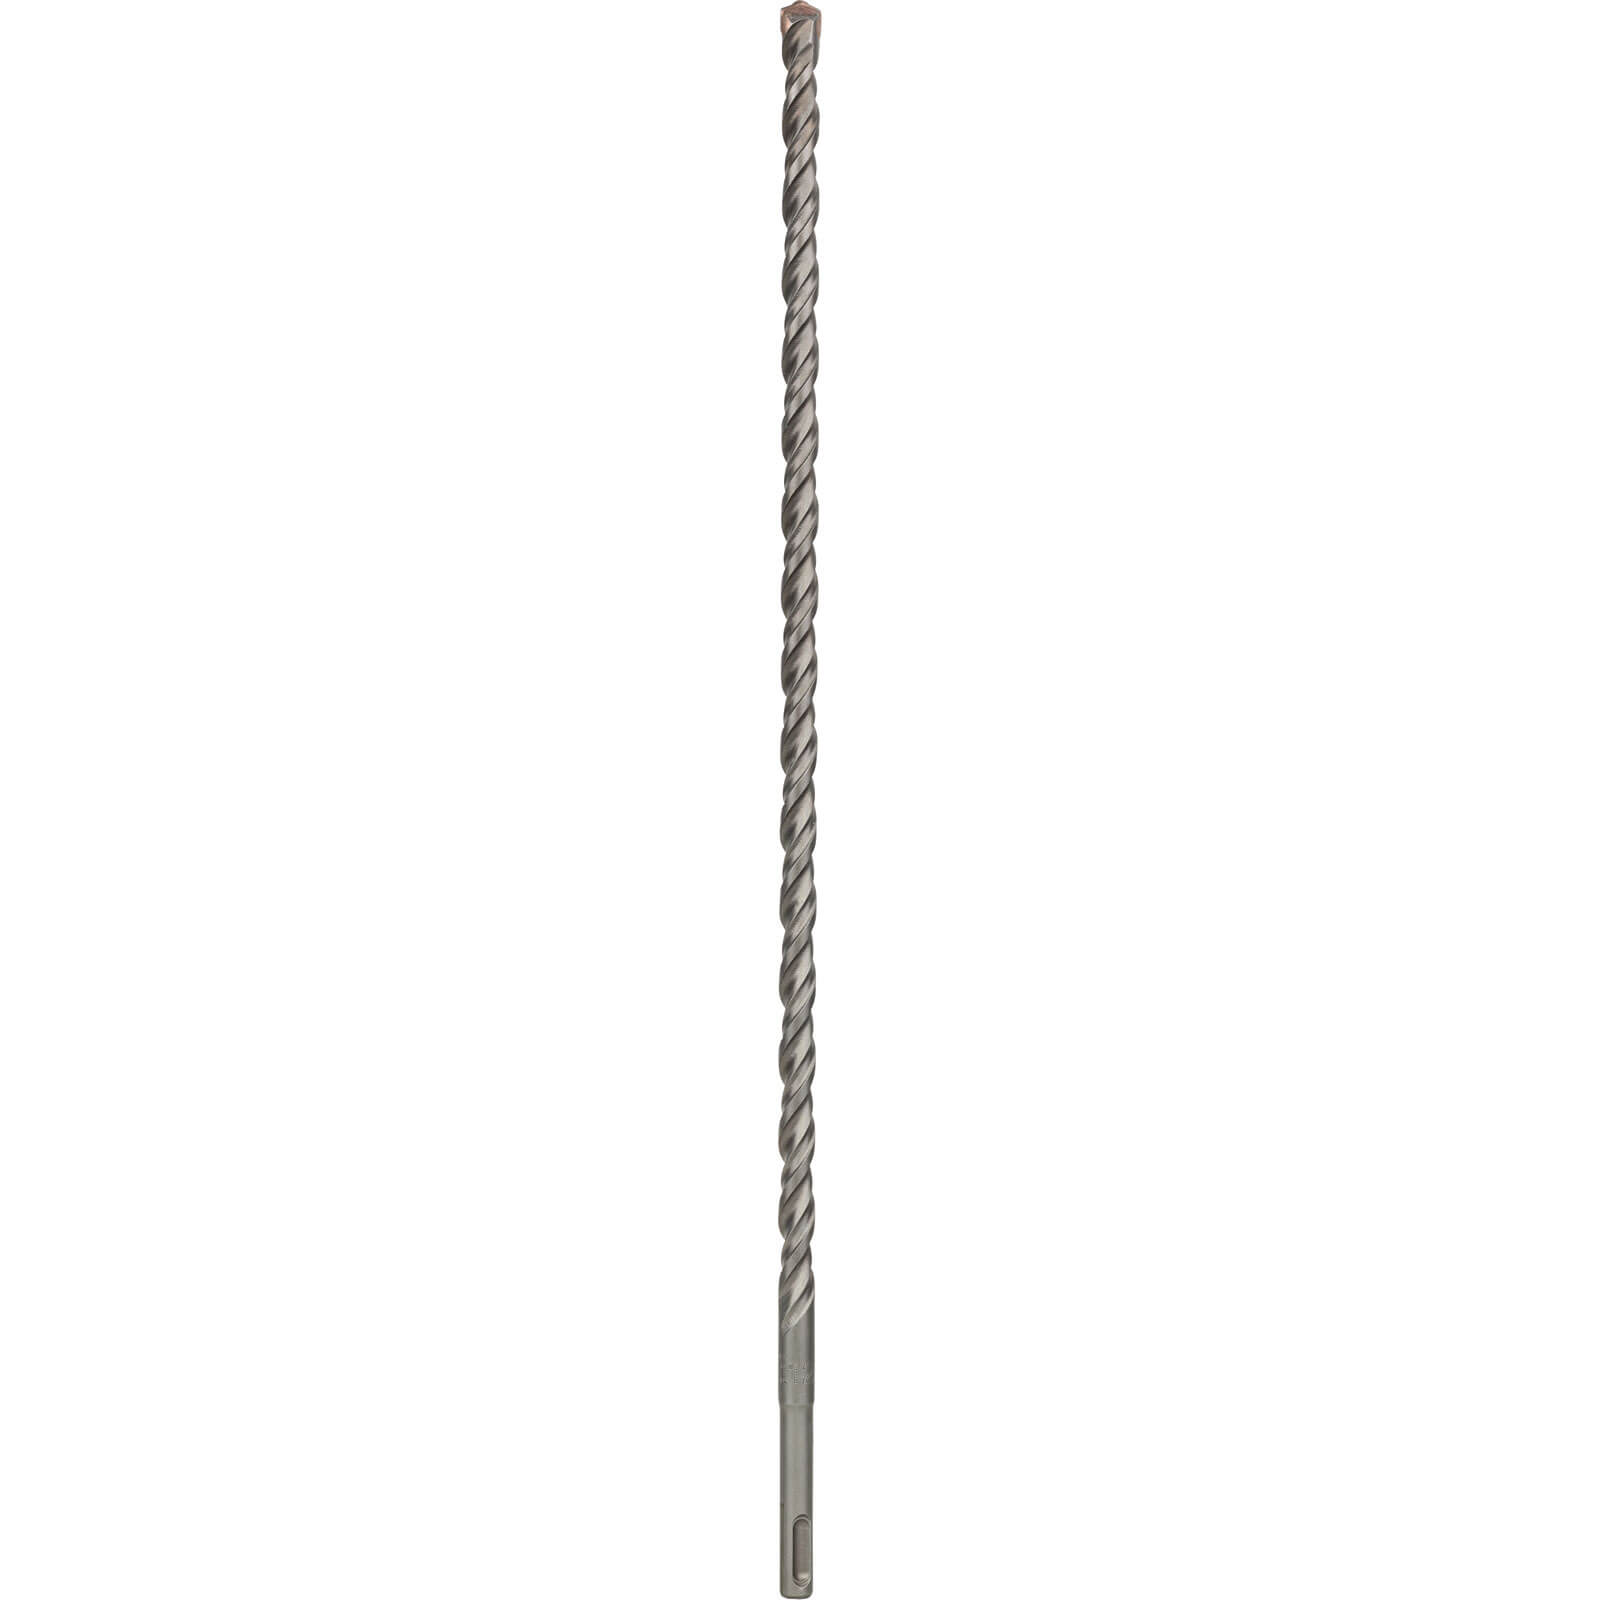 Image of Bosch Series 3 SDS Plus Masonry Drill Bit 12mm 460mm Pack of 1